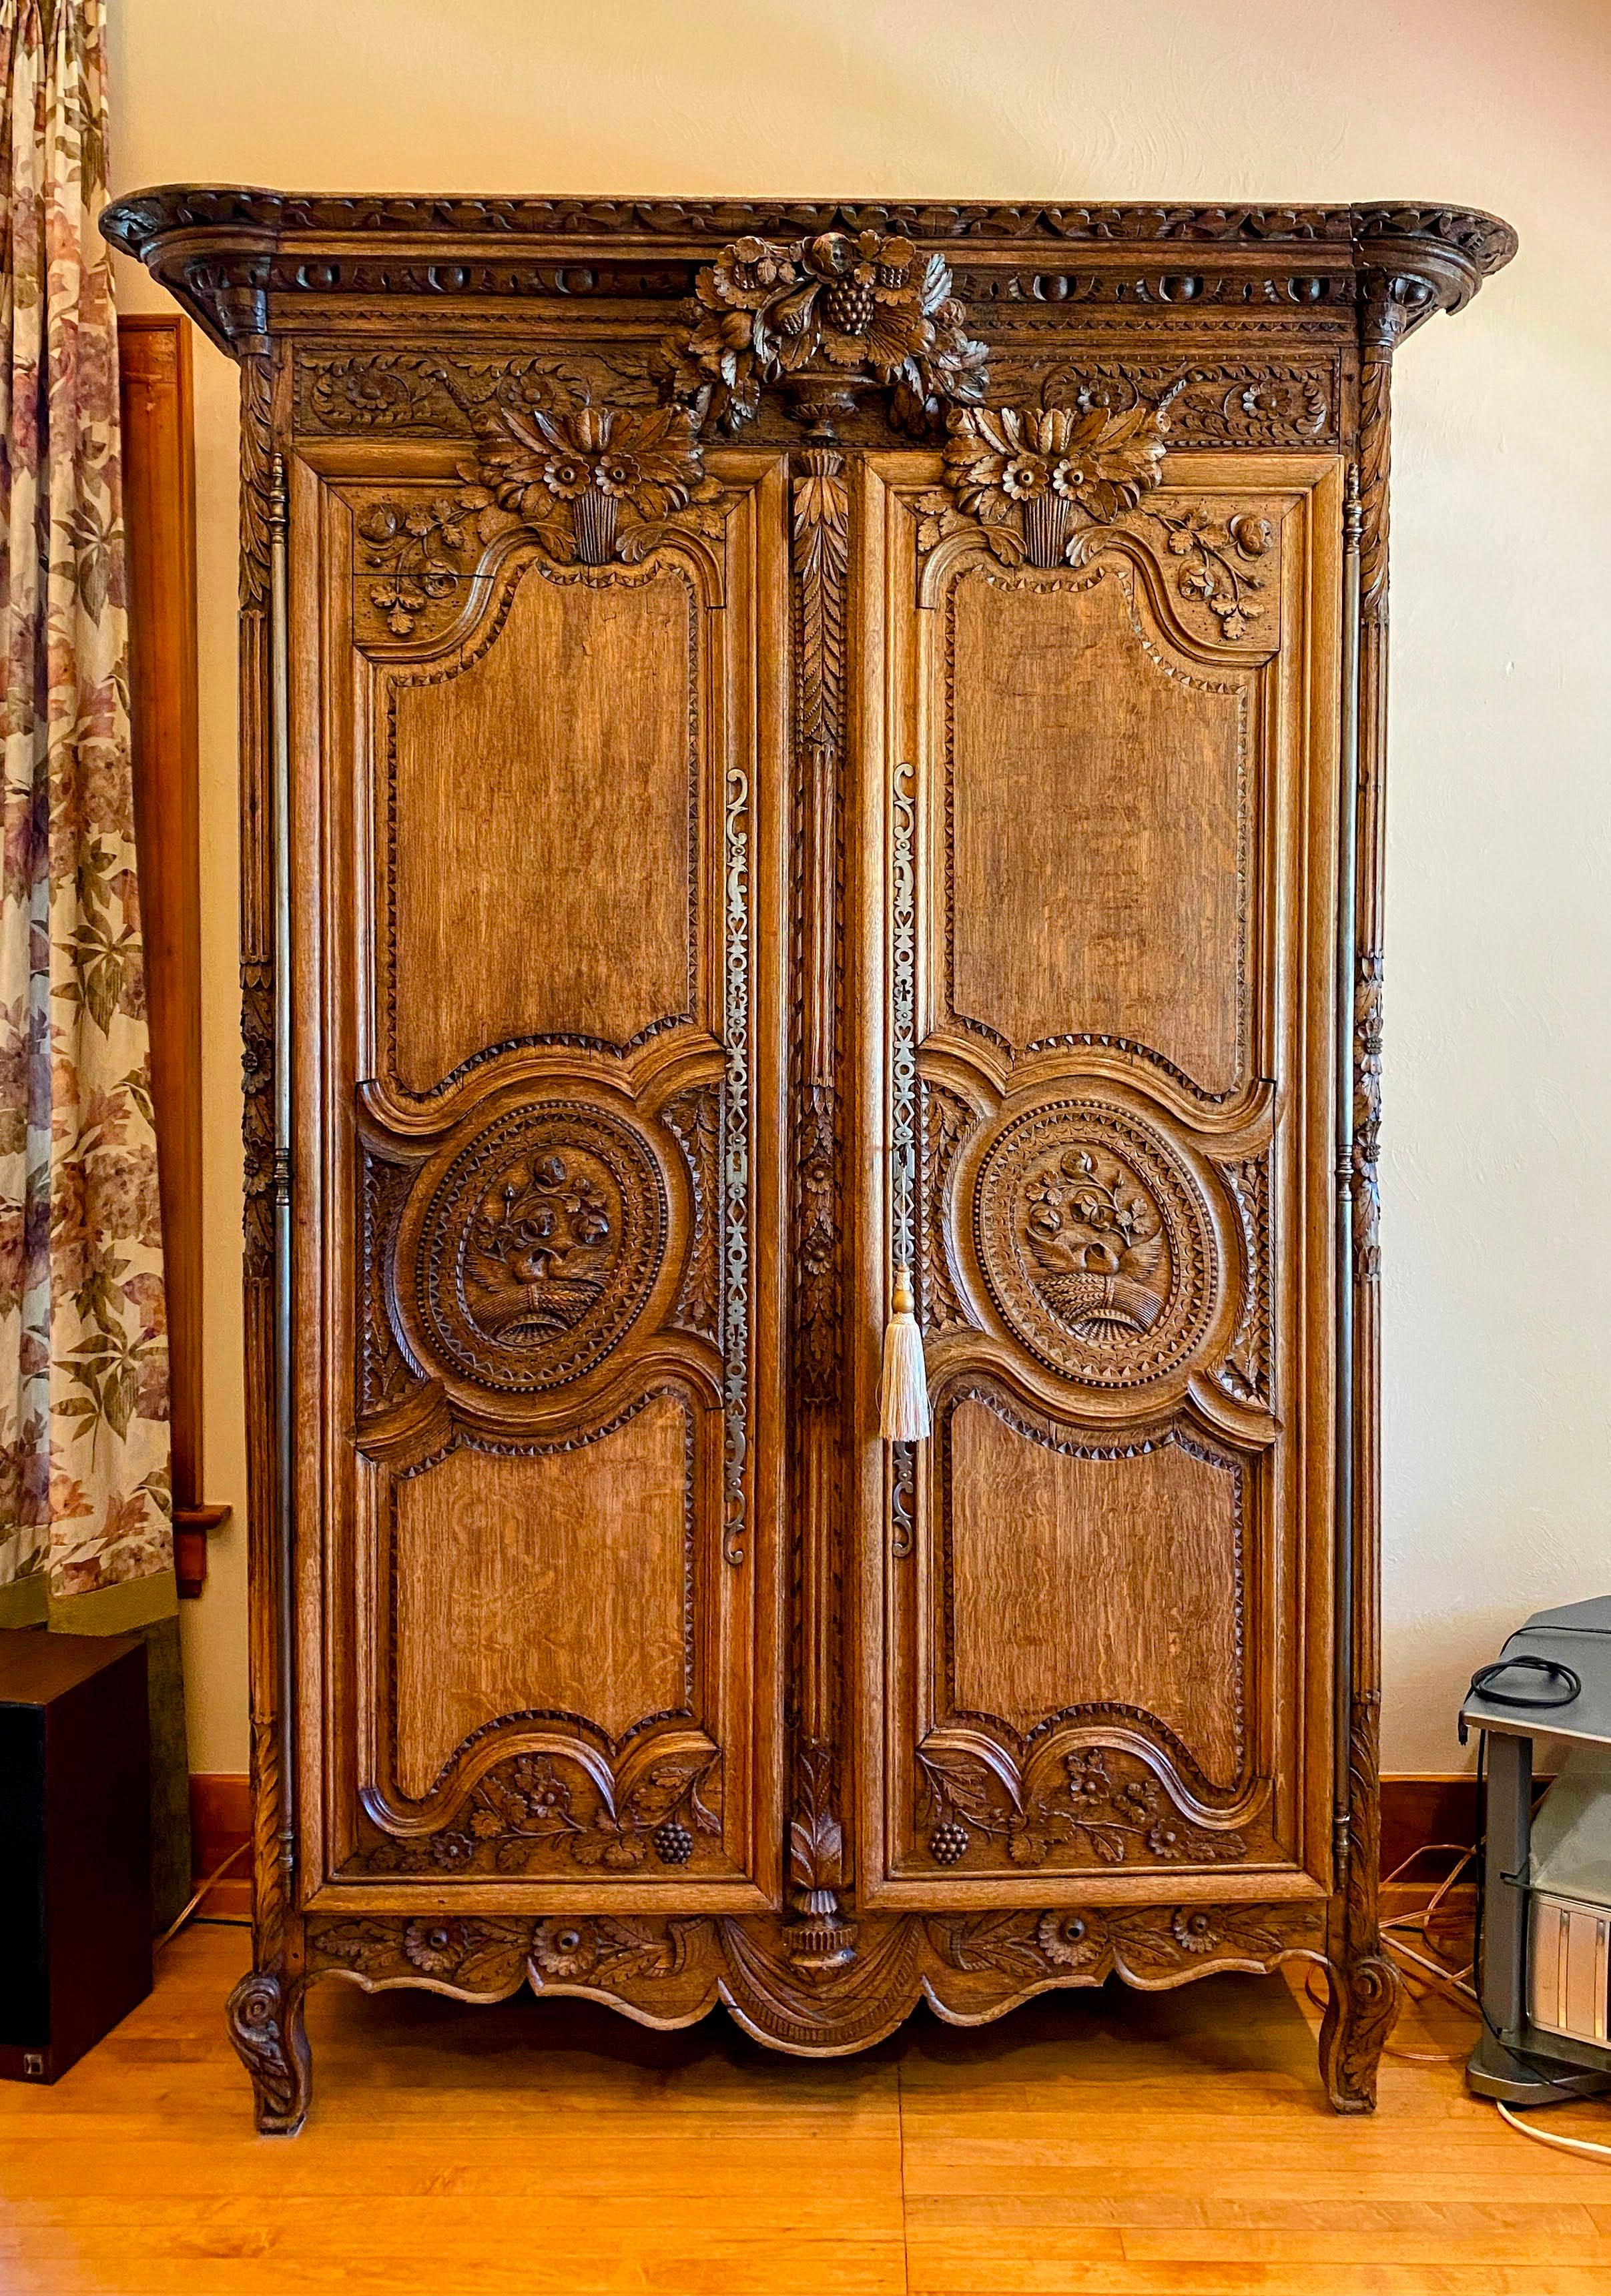 Exquisite Norman style de Bayeux, Oak, circa late 1800's. This armoire is heavily and ornately carved throughout, 2 doors, 3 interior shelves & two drawers one locking, inside.  Peg construction.  Newer addition of 6 interior drawers added without